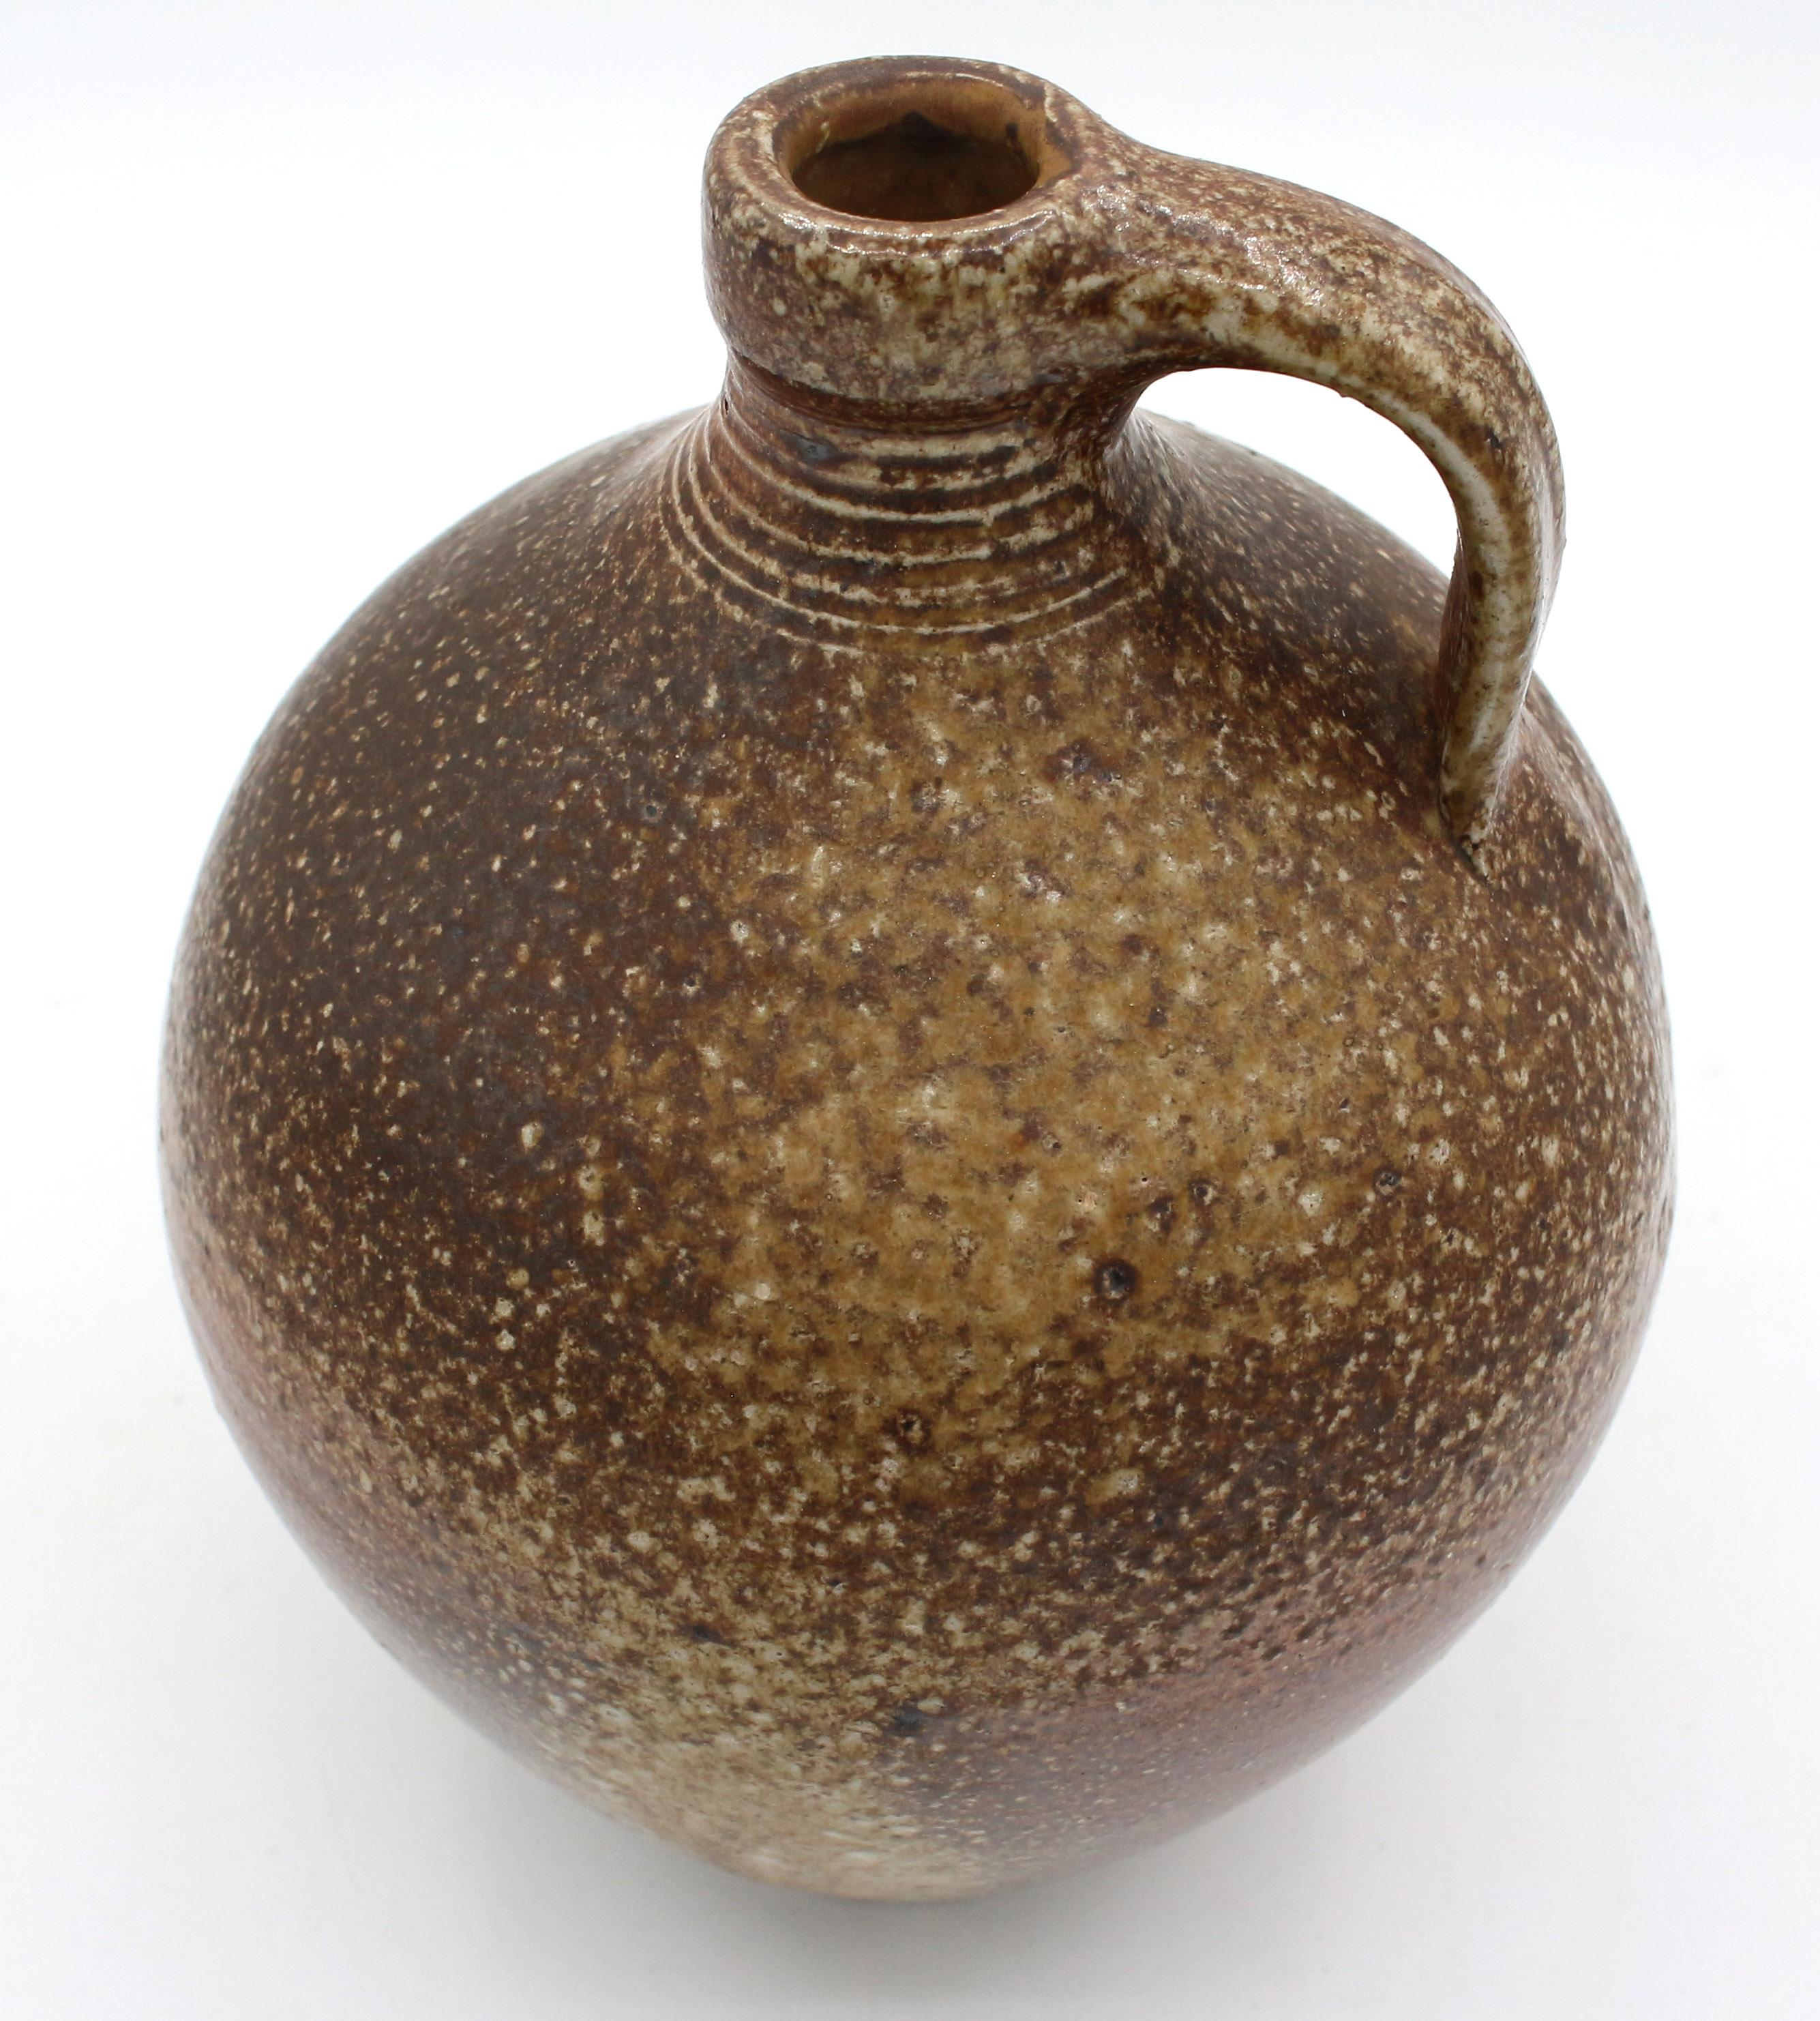 1984-1995 Mark Hewitt Pottery jug. Speckled brown; elegantly turned. WMH mark with a D.
7.75